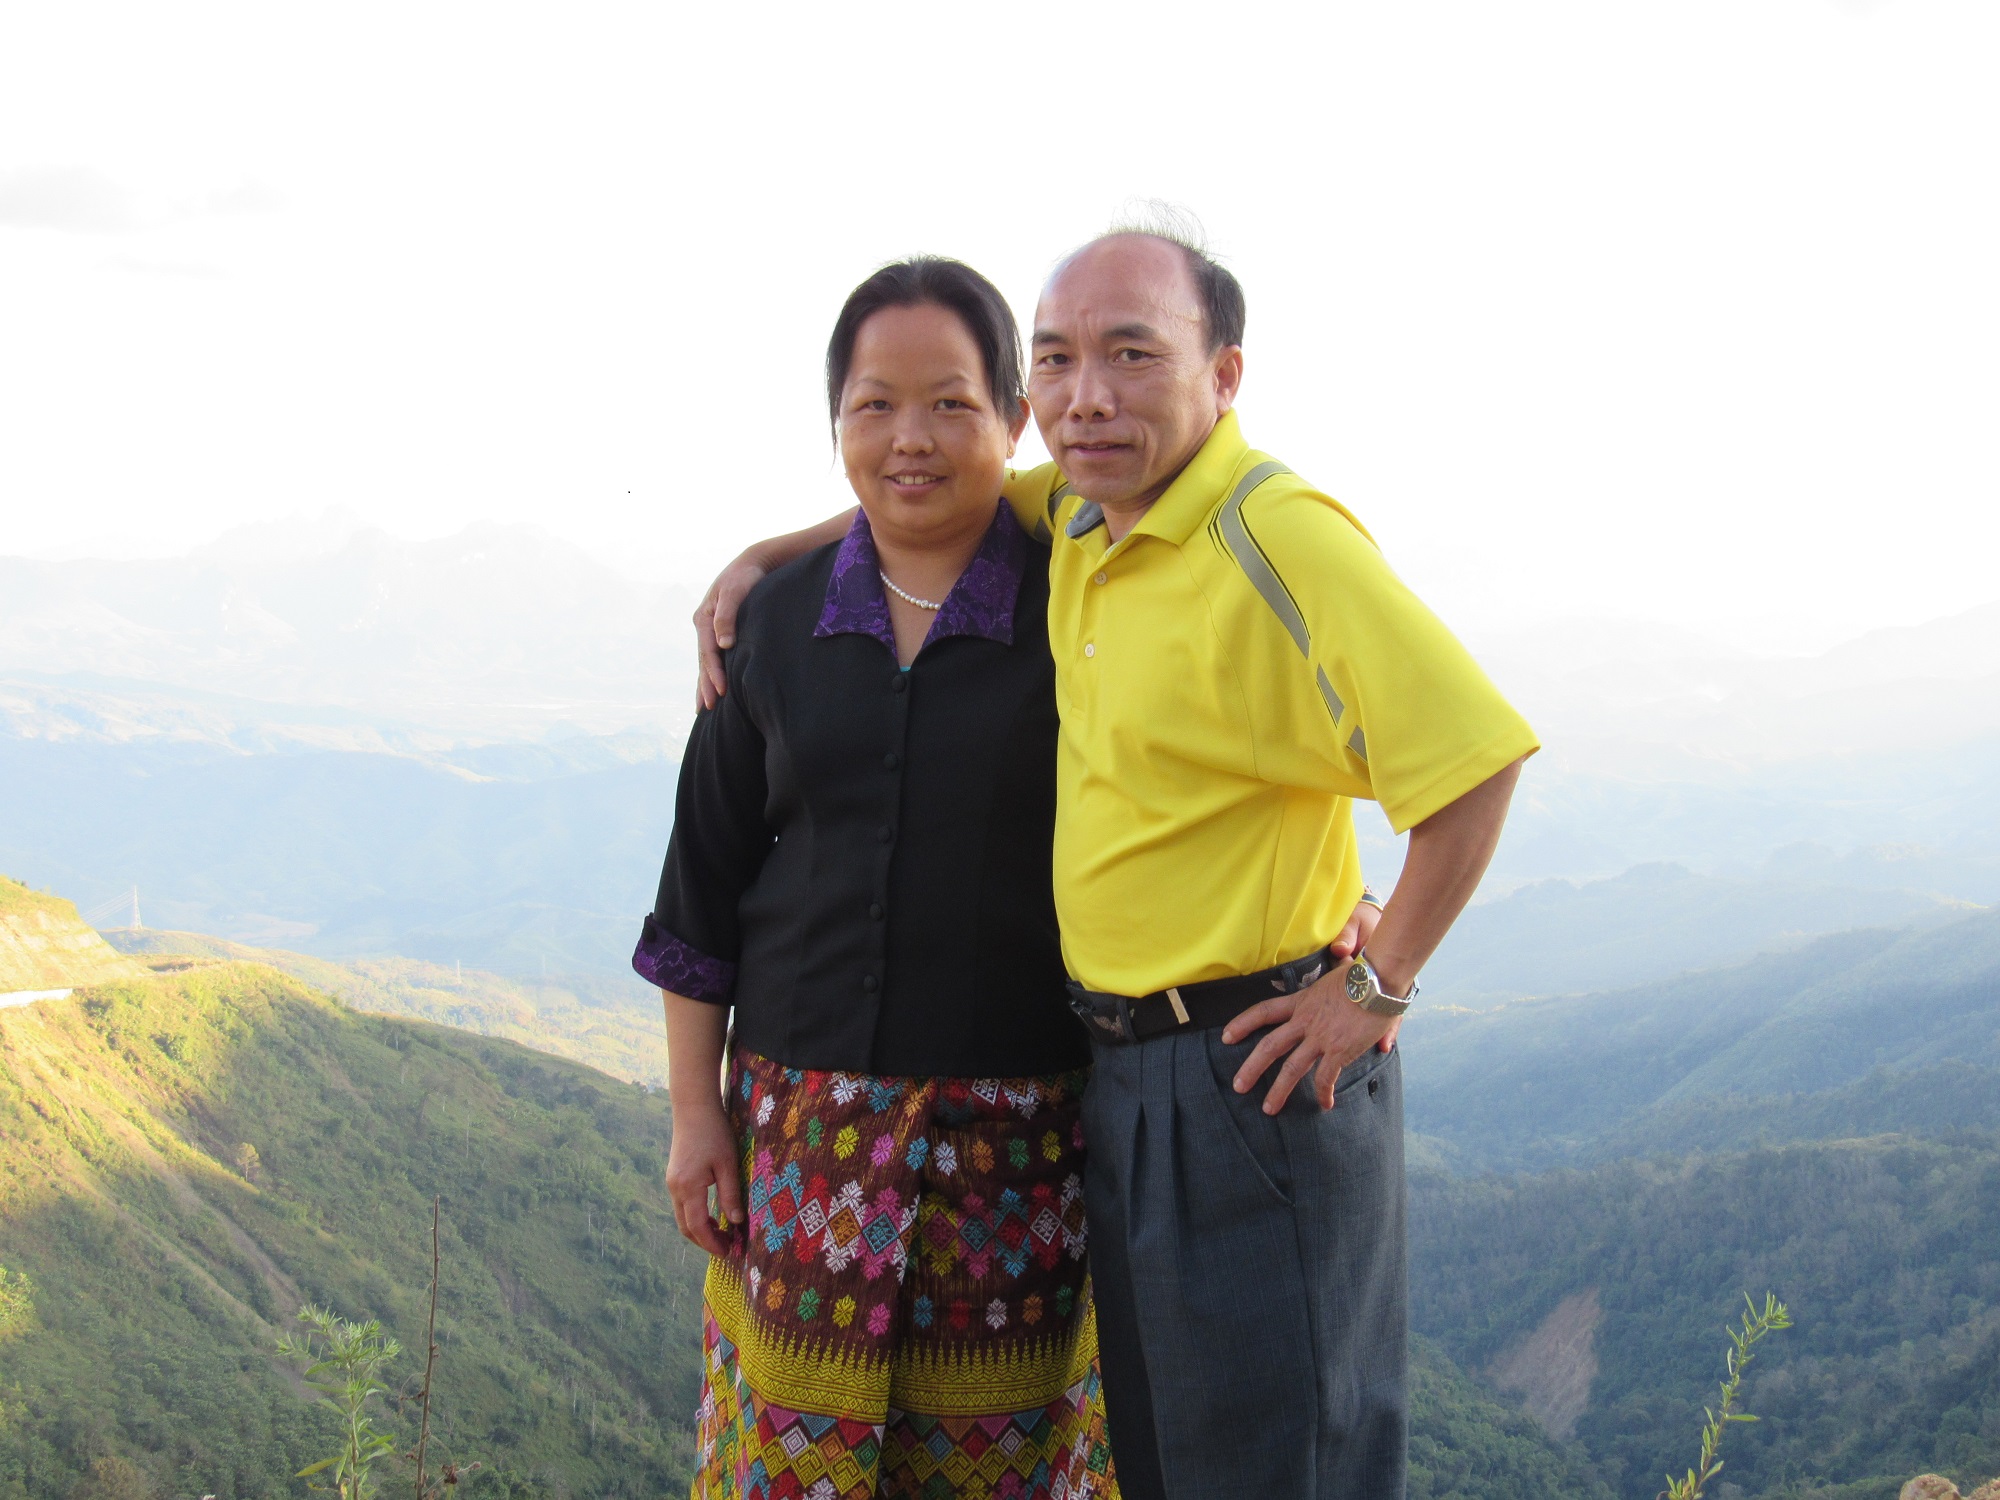 Lisa Chue Thao and William Shoua Lor visiting Laos and Thailand December 2014. It was their first visit since leaving in 1987. (Courtesy of Yia Lor)